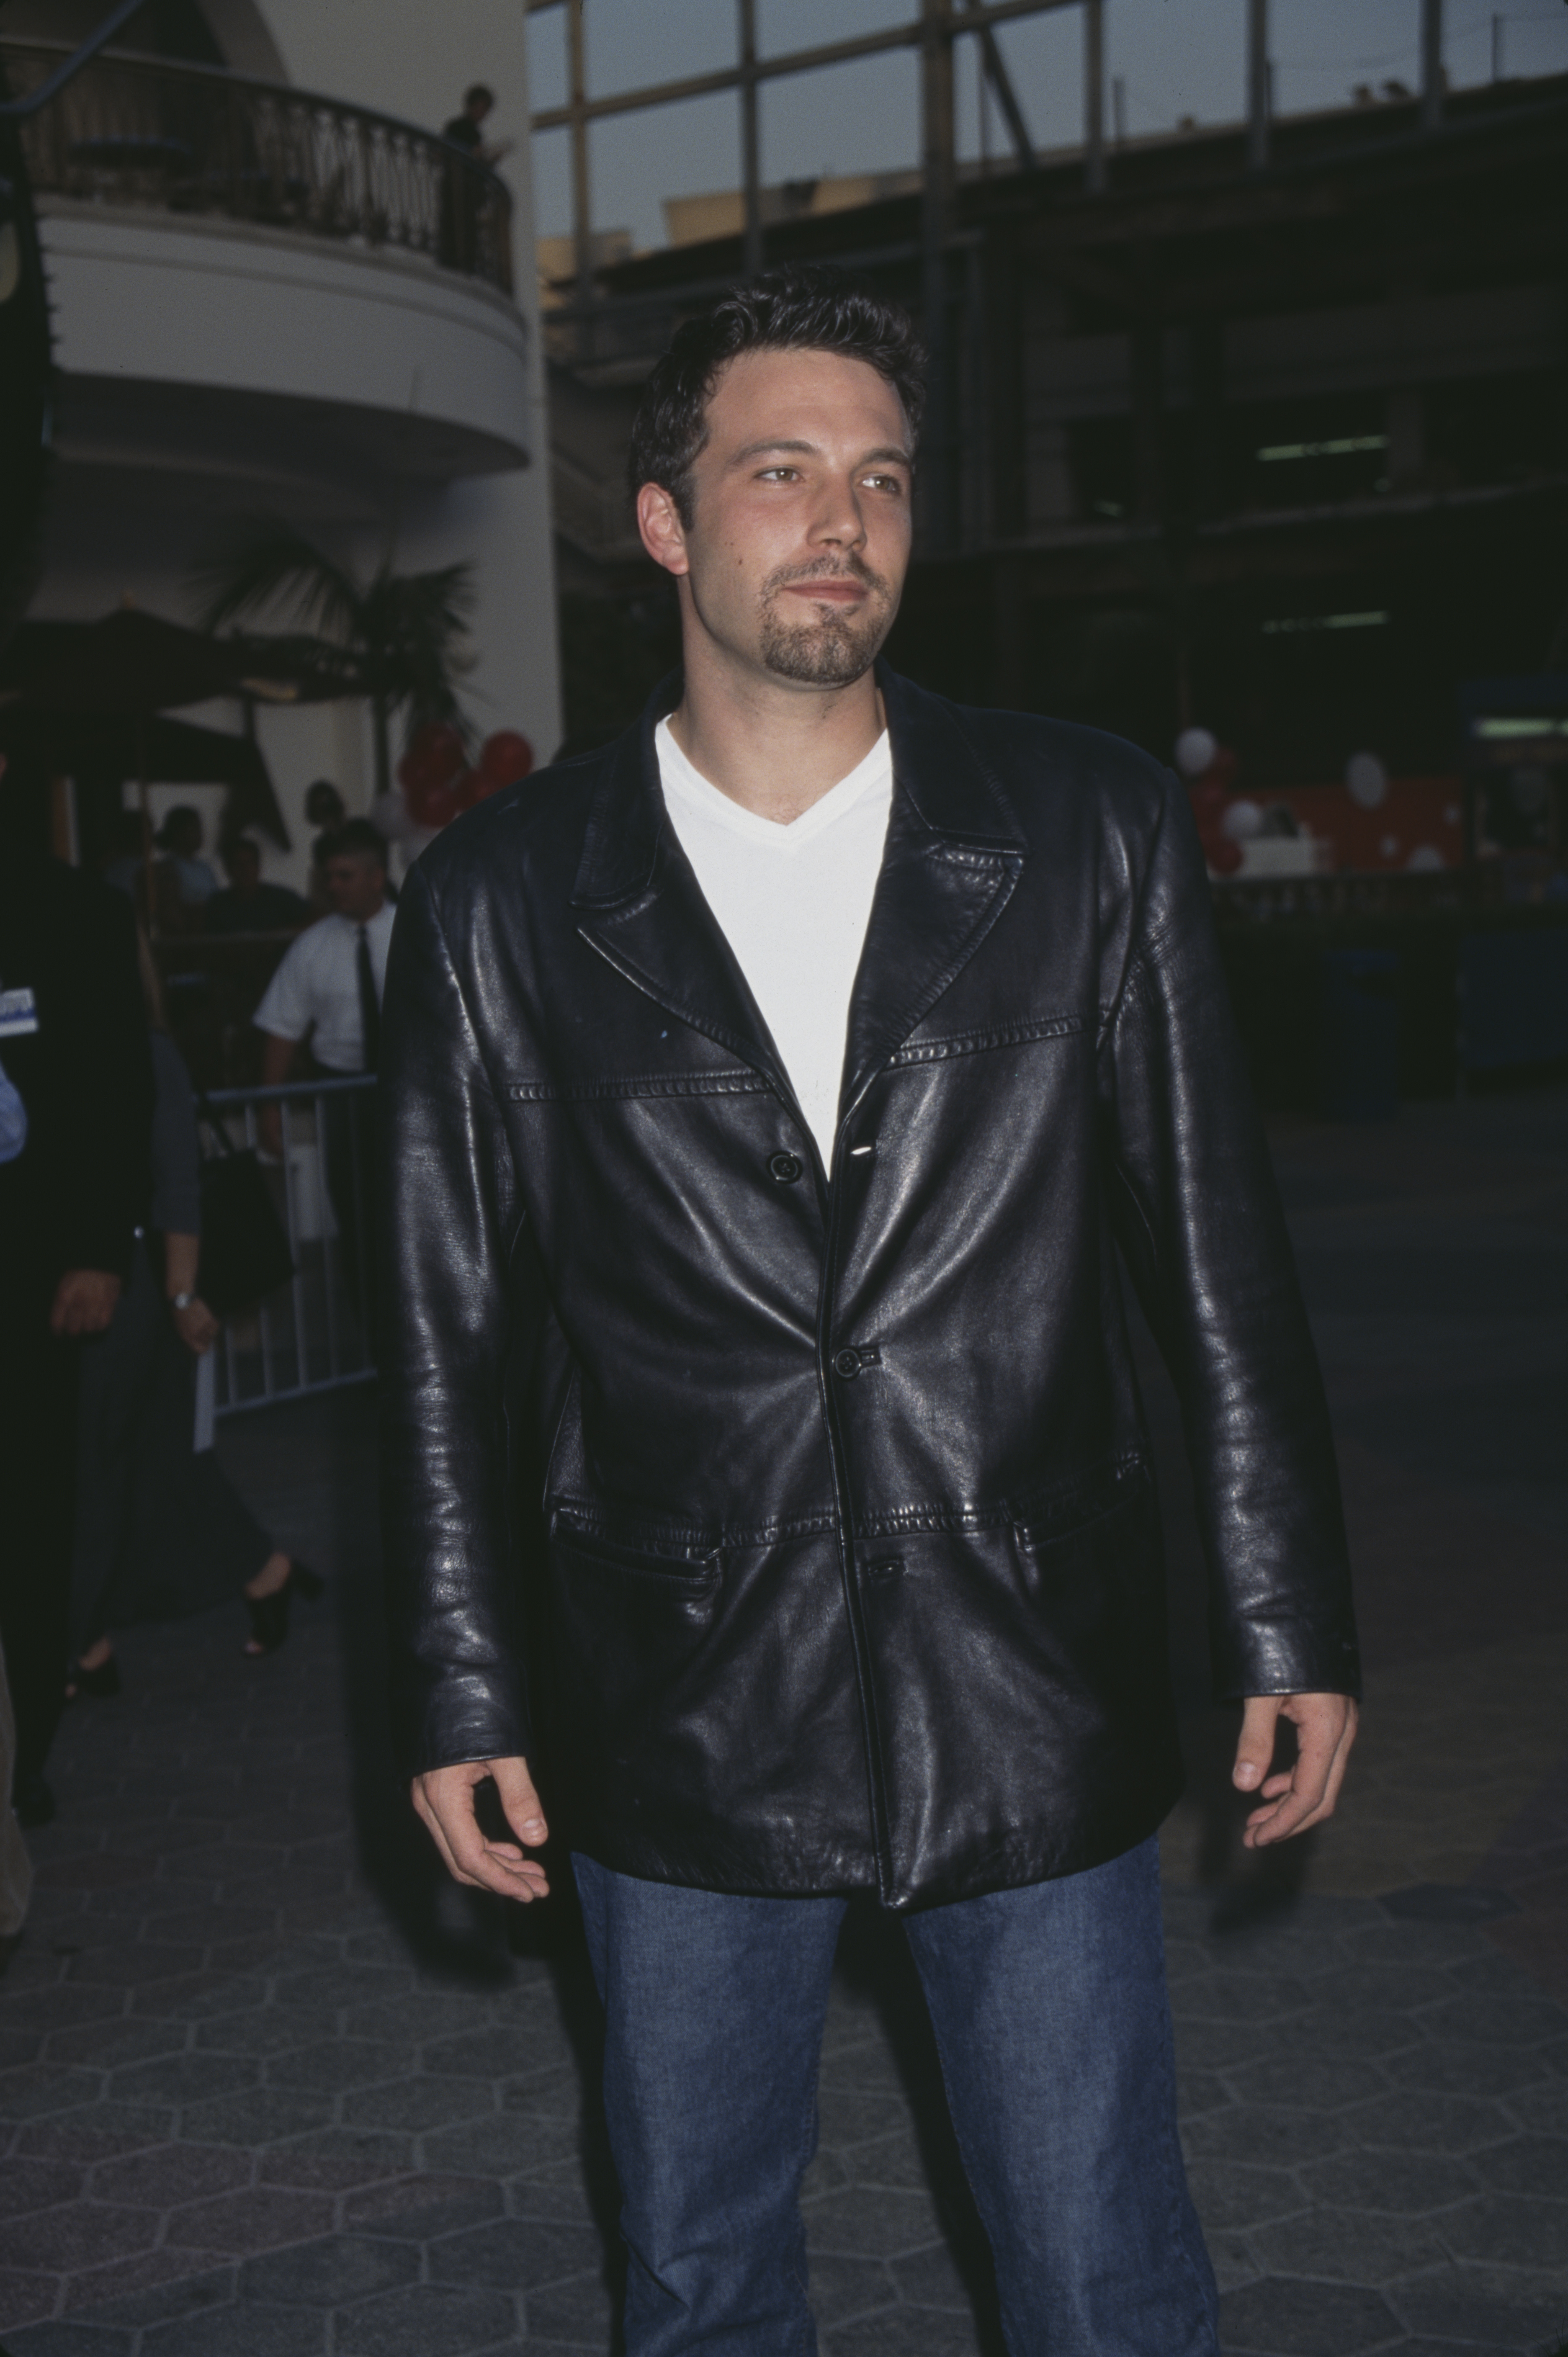 Ben Affleck at the premiere of 'American Pie', held at Cineplex Universal City Cinemas in Universal City, California, 7th July 1999 | Source: Getty Images